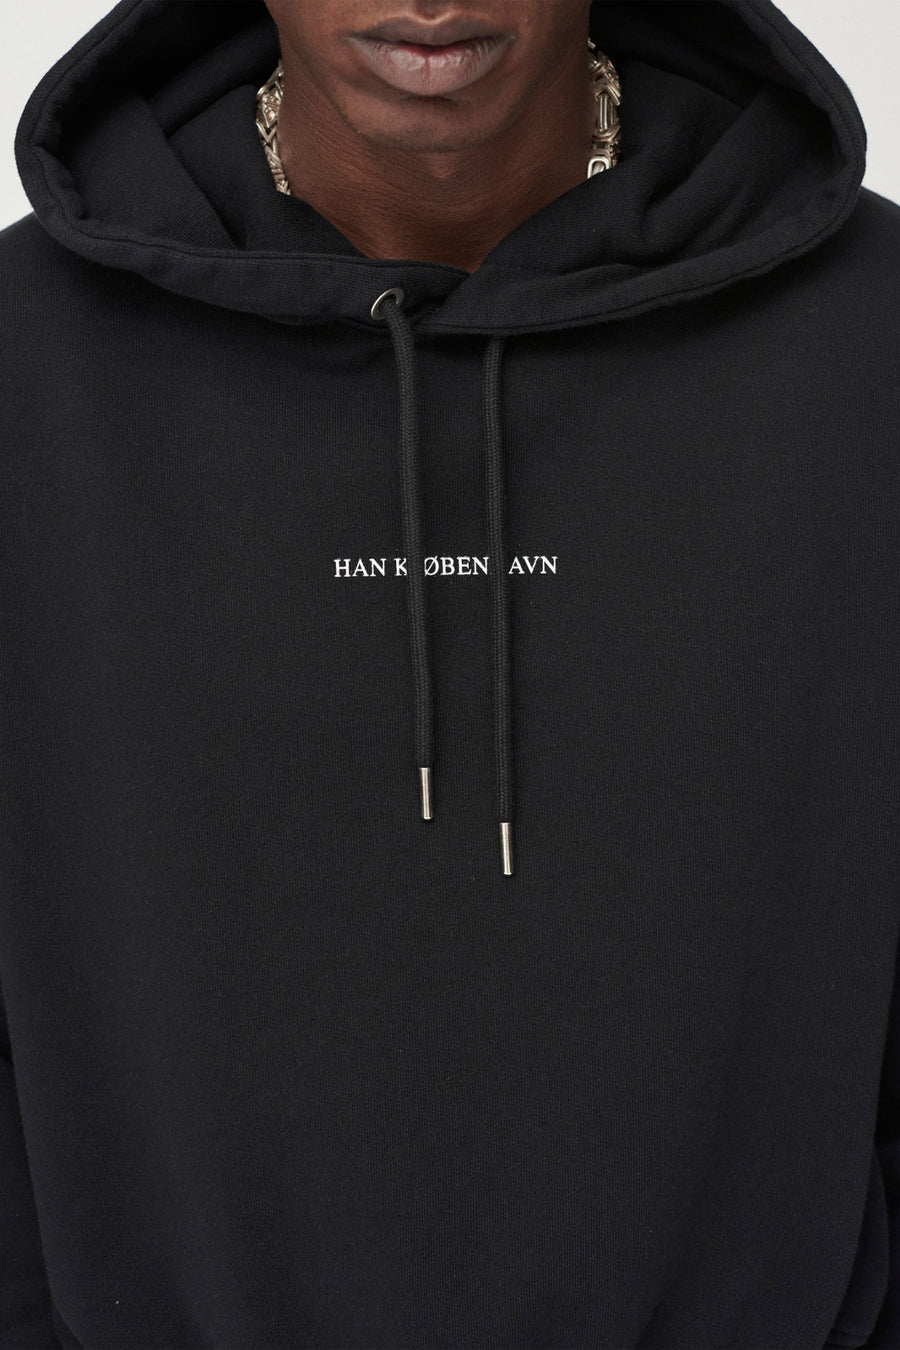 Buy the Han Kjobenhavn Supper Cropped Relaxed Hoodie in Black at Intro. Spend £50 for free UK delivery. Official stockists. We ship worldwide.